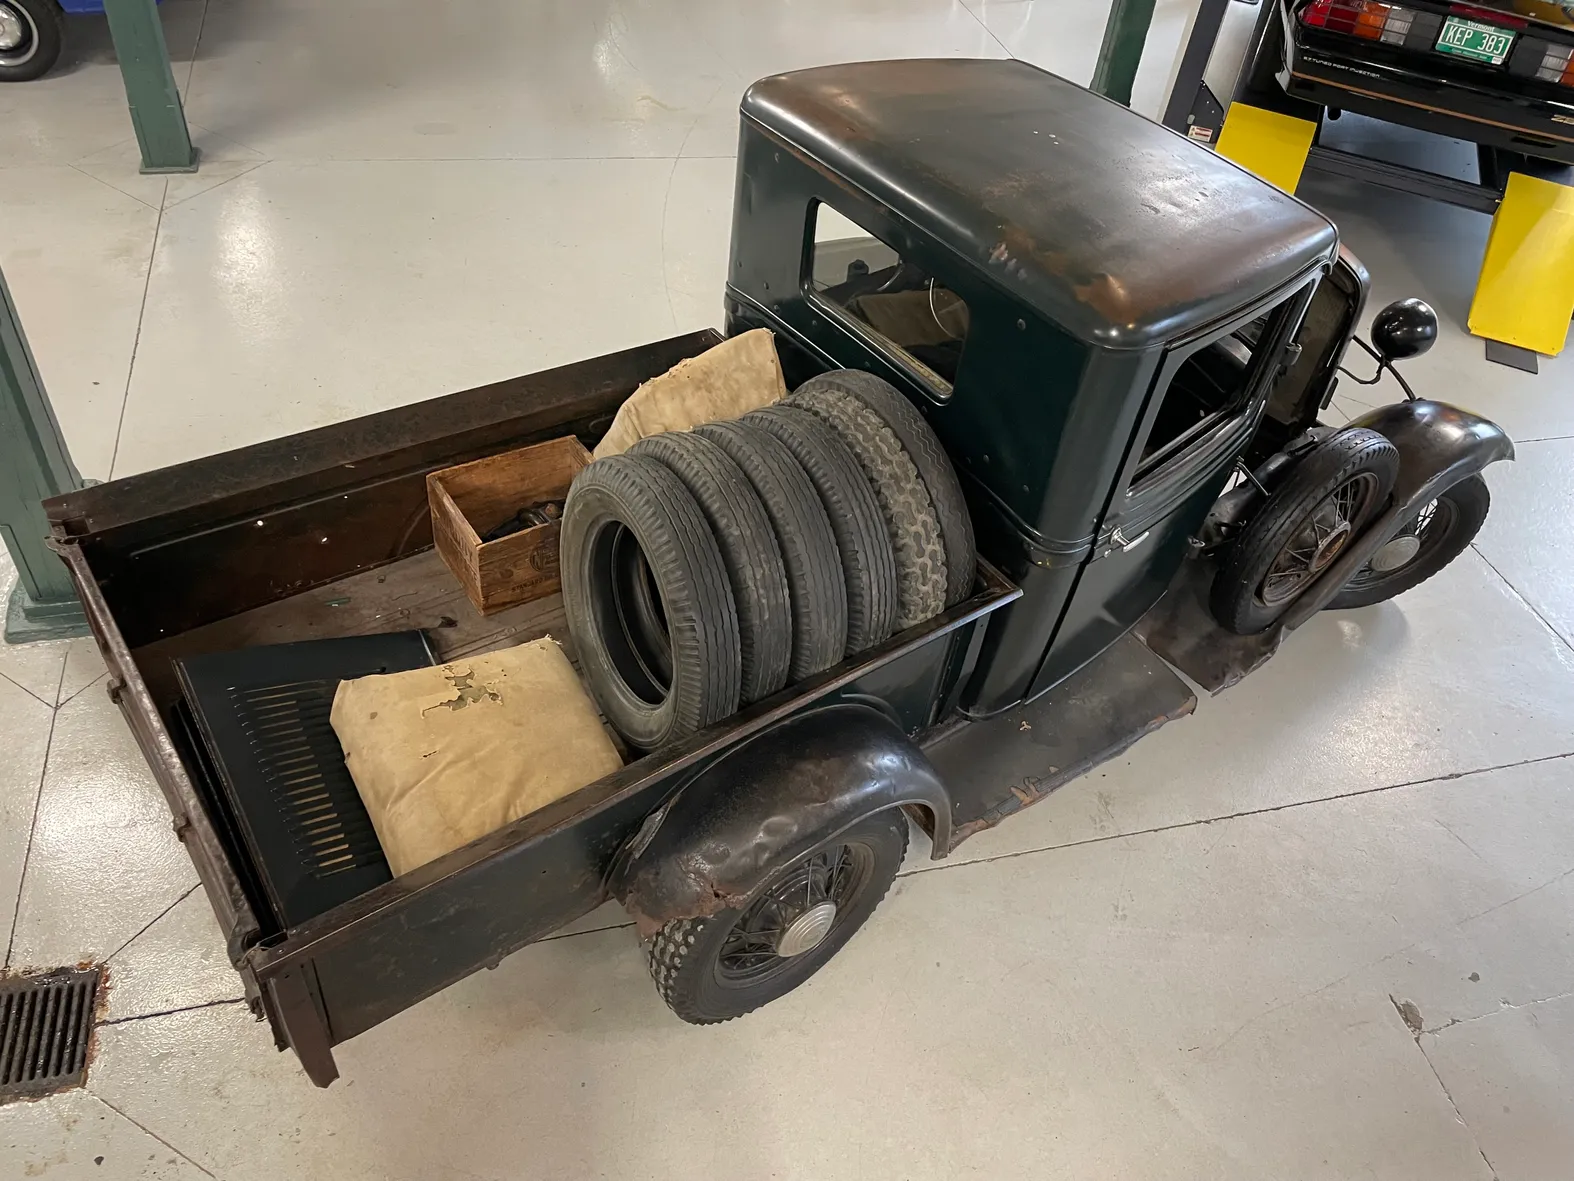 Featured image for “WOOT! It Runs! Beating on the Hemmings Garage’s 1932 Ford Model B pickup.”